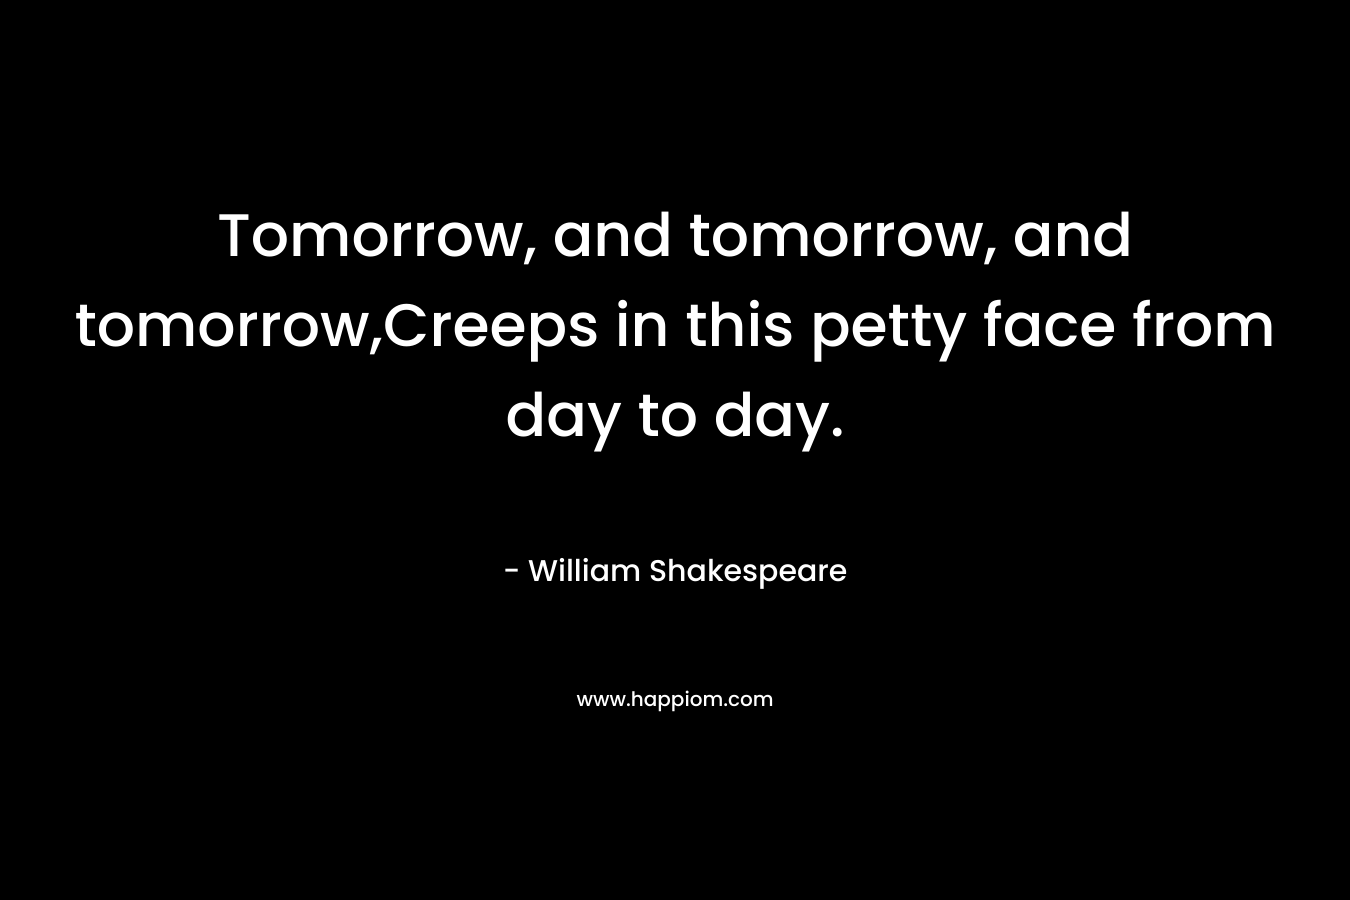 Tomorrow, and tomorrow, and tomorrow,Creeps in this petty face from day to day. – William Shakespeare